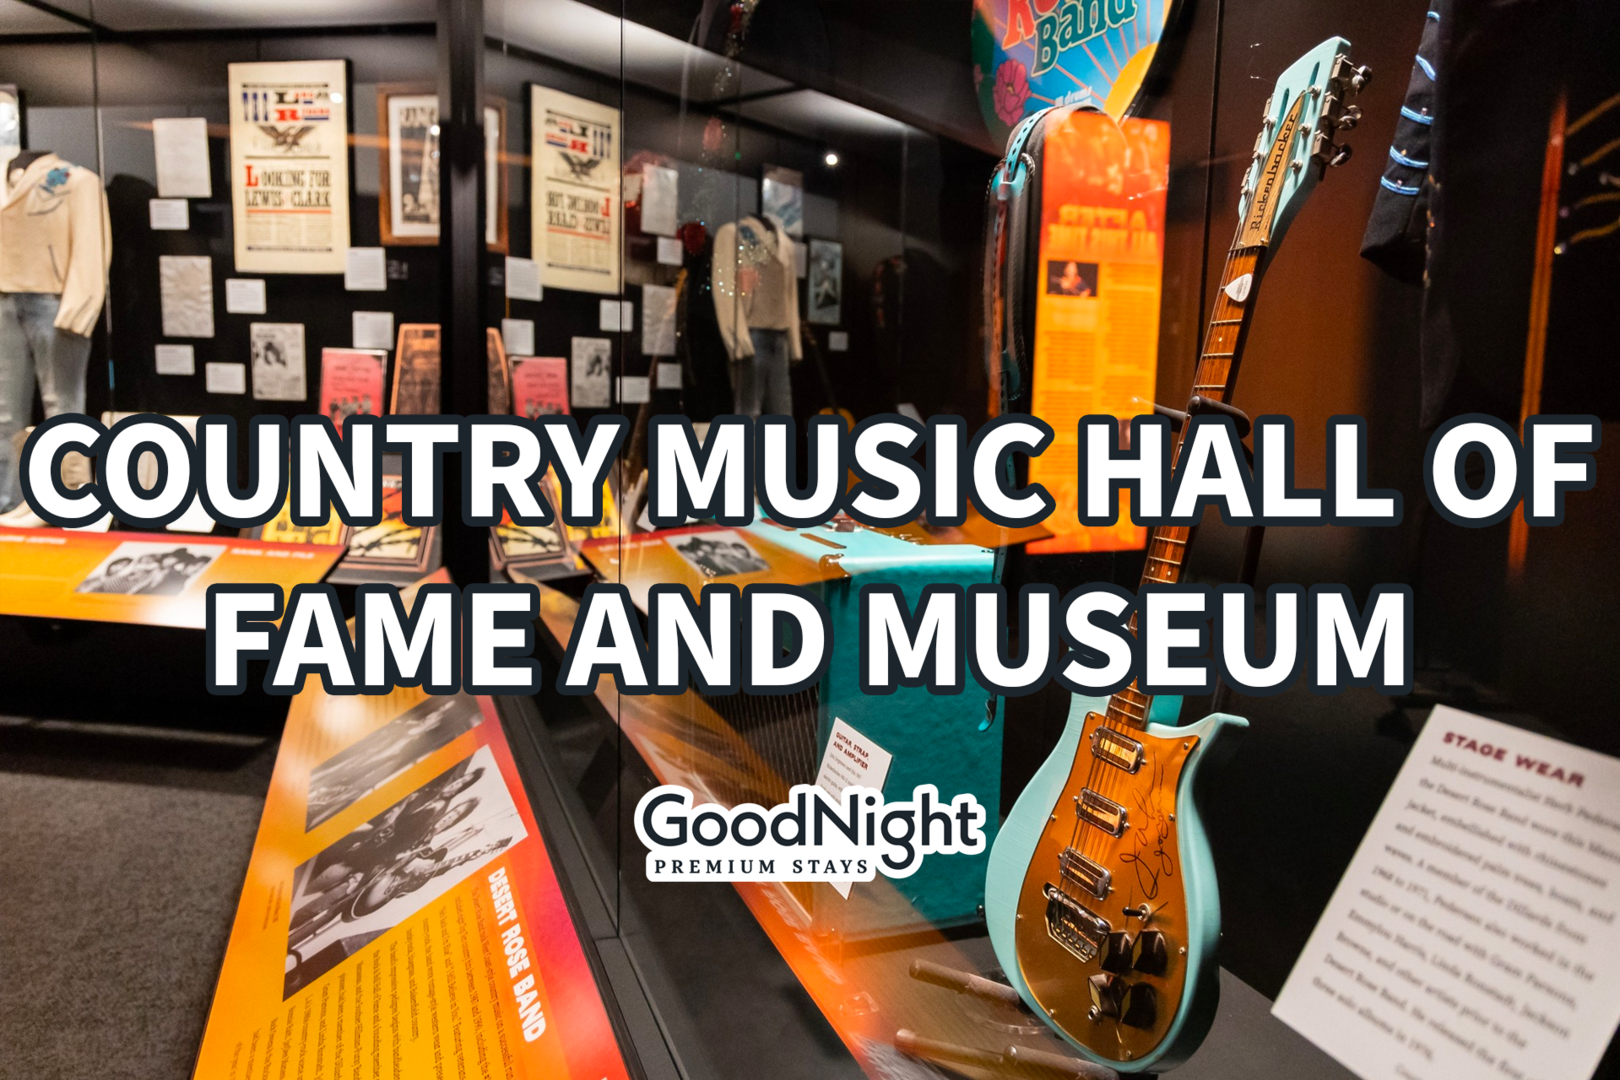 11 min walk: Country Music Hall of Fame and Museum